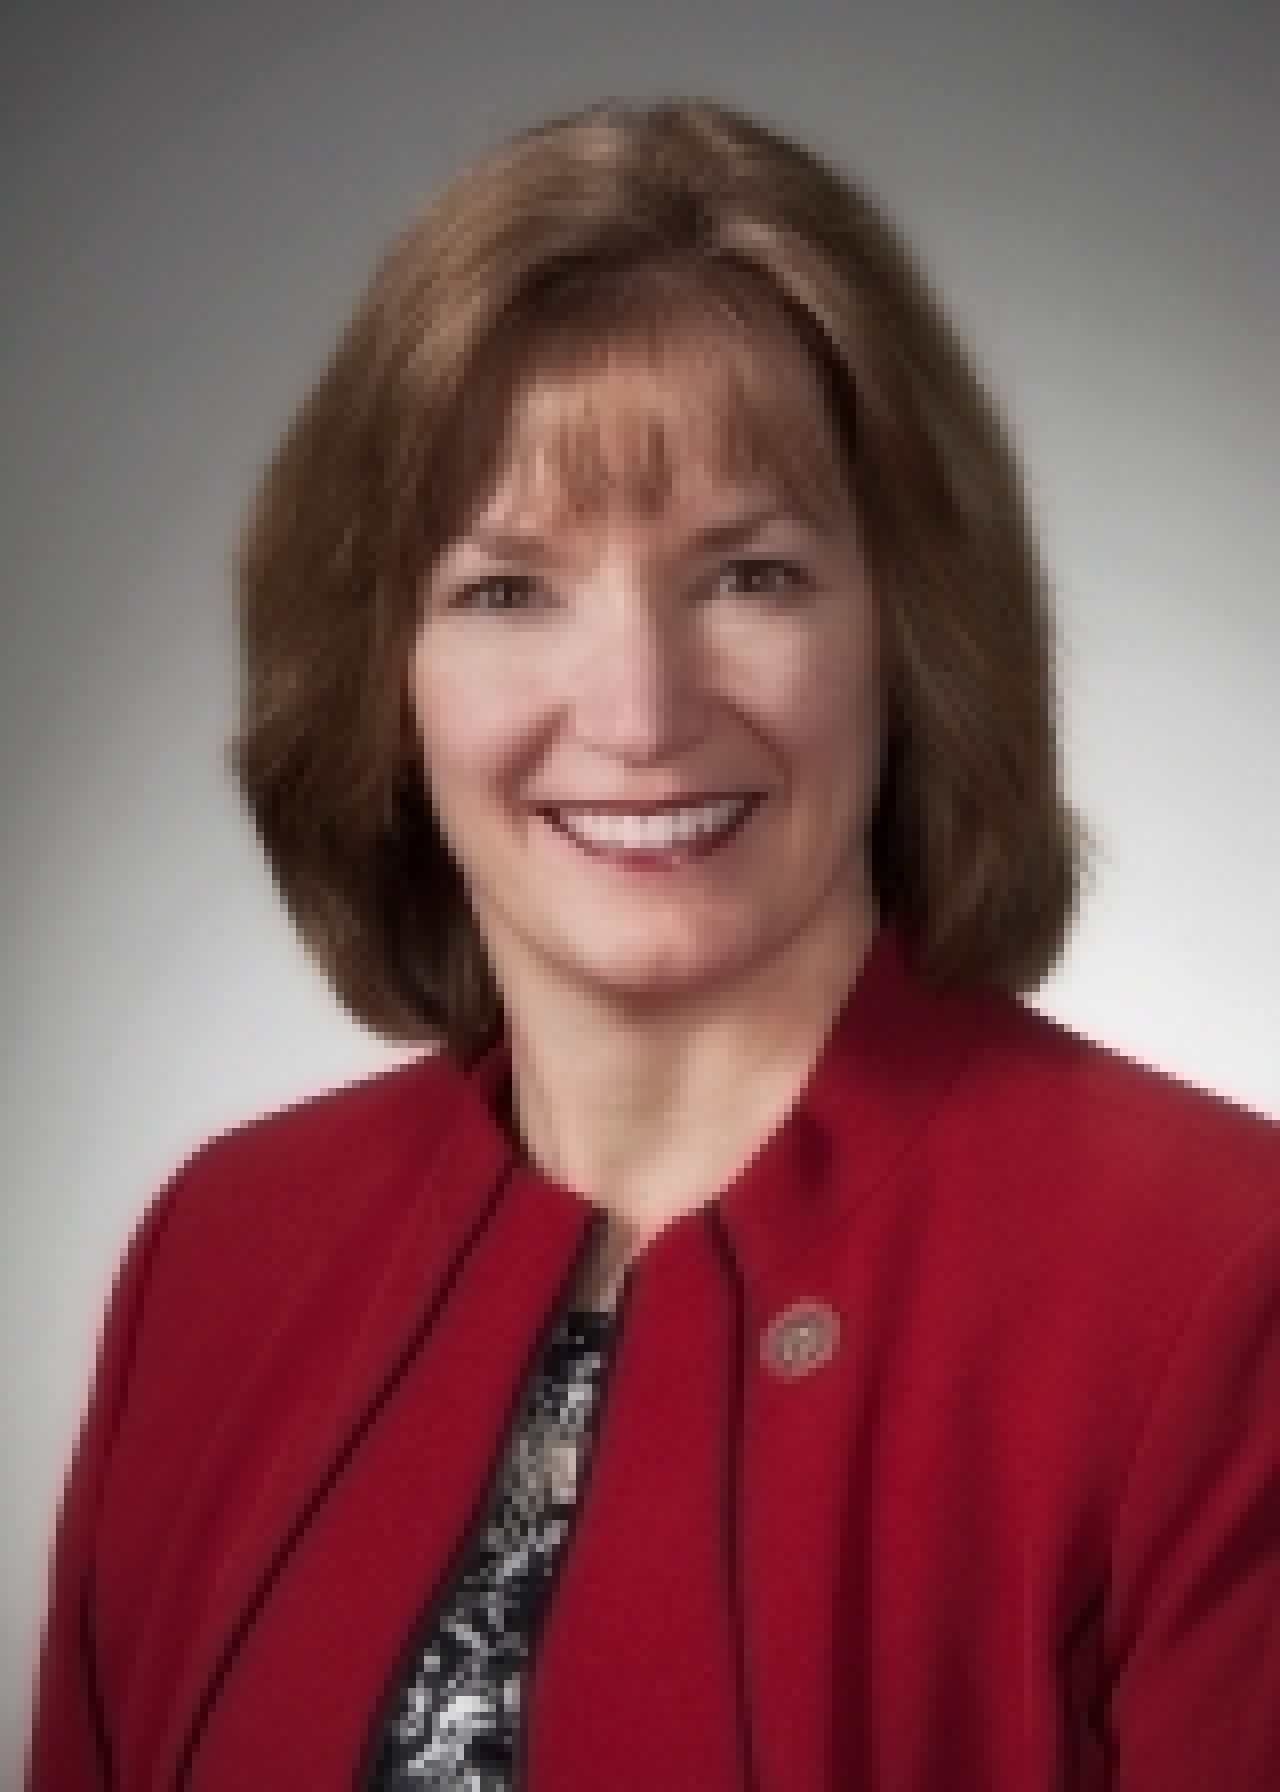 Rep. Anielski Applauds Passage of Bill to Raise Awareness for Teen Dating Violence